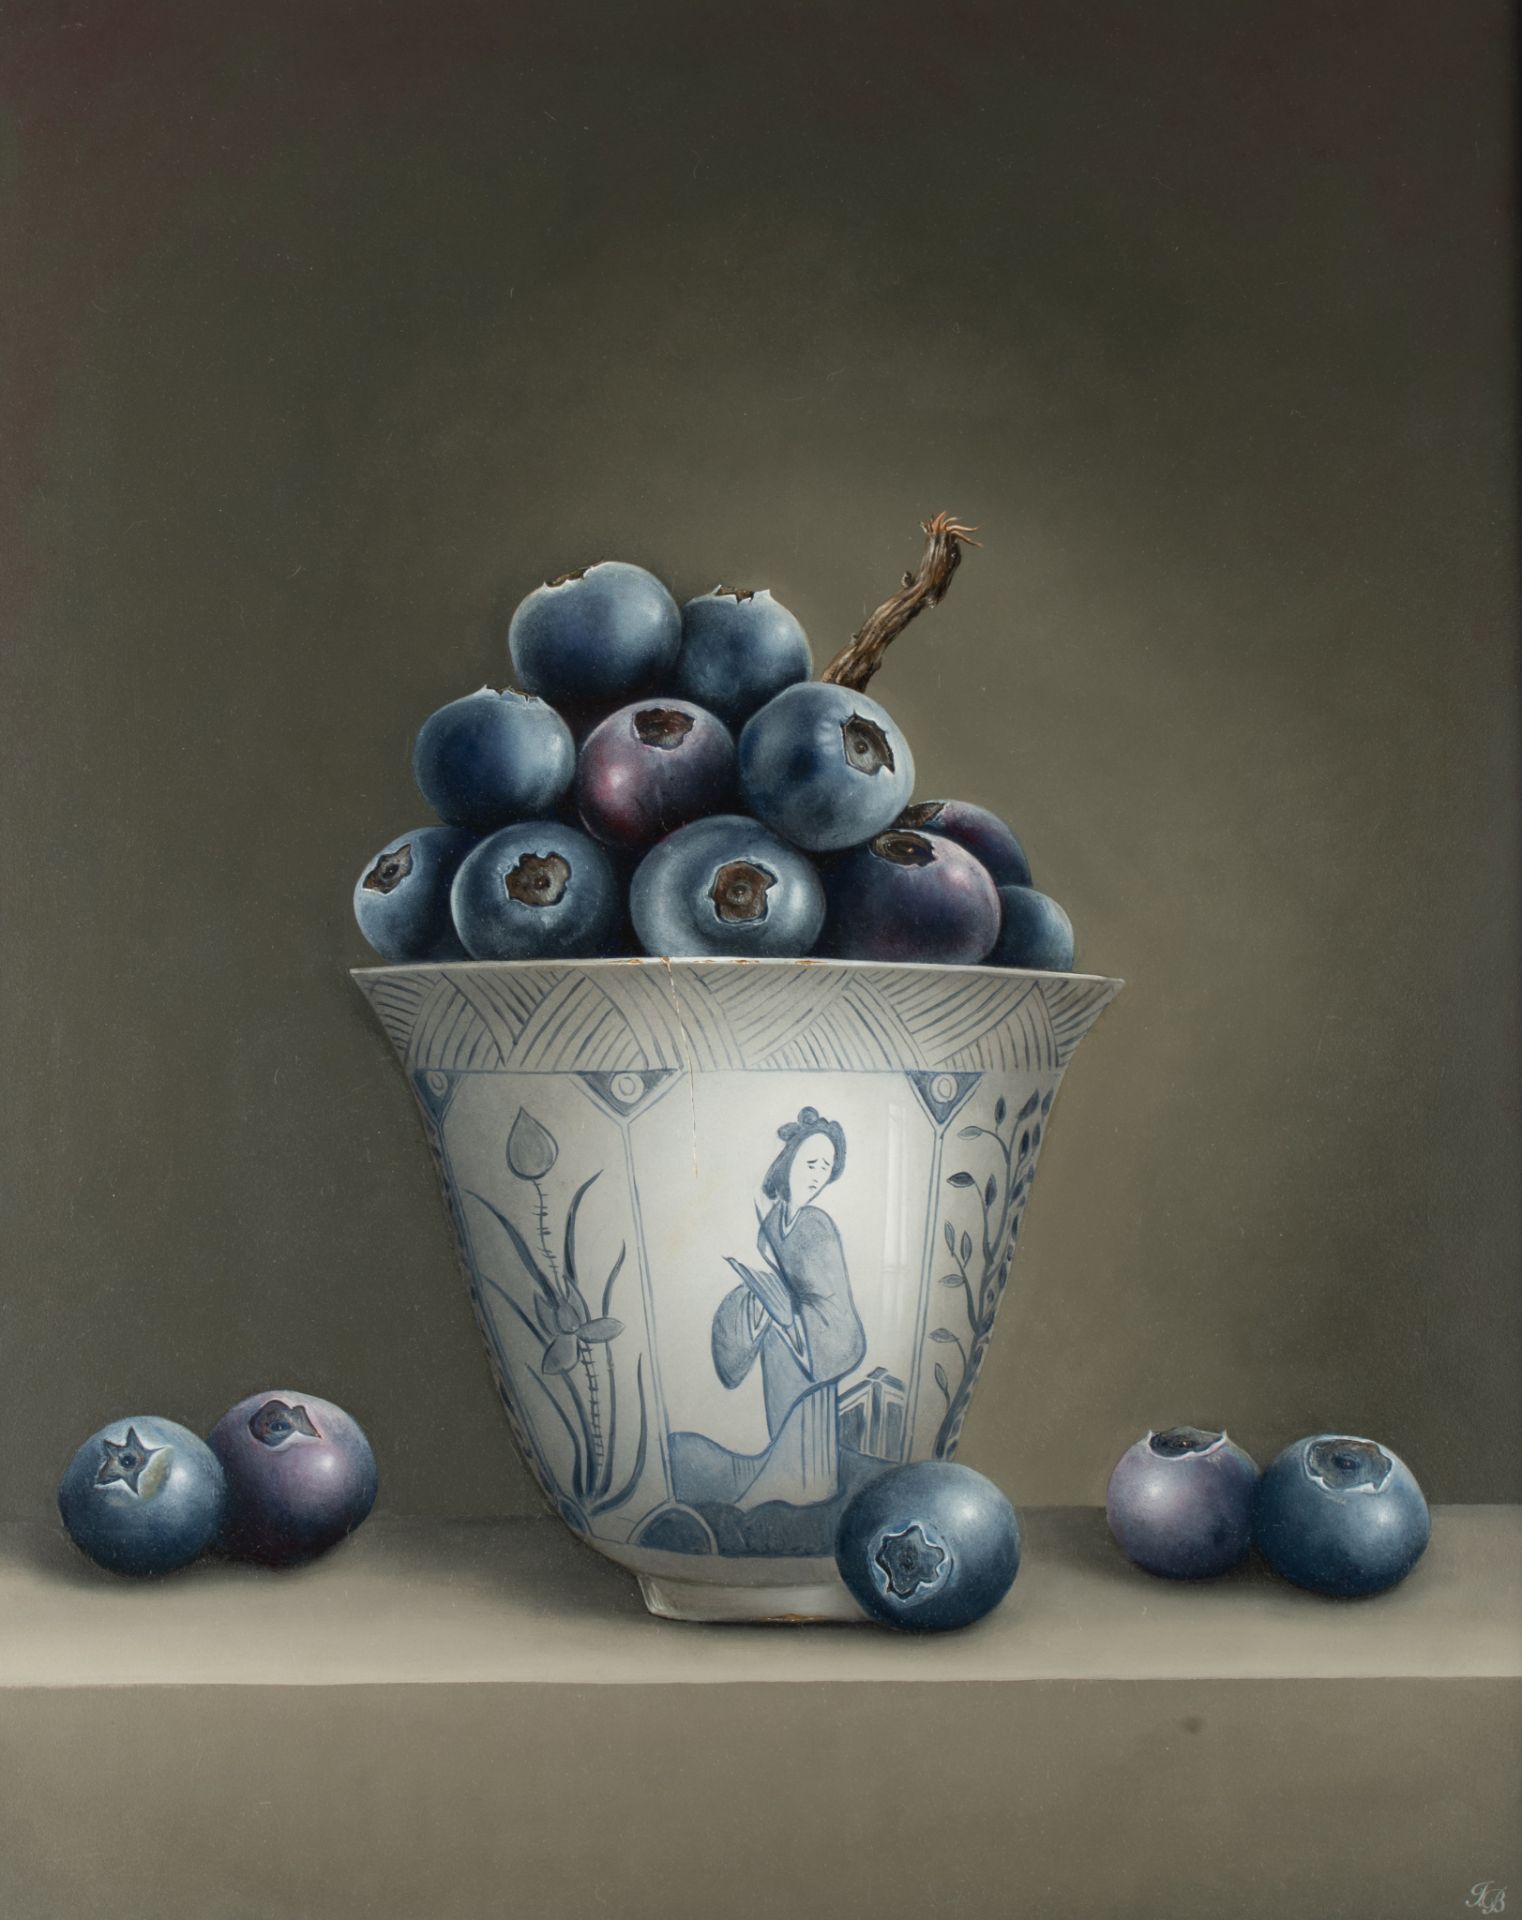 Ignace Bauwens, blueberries in a Chinese Ming 'Klapmuts', oil on panel, 80 x 100 cm